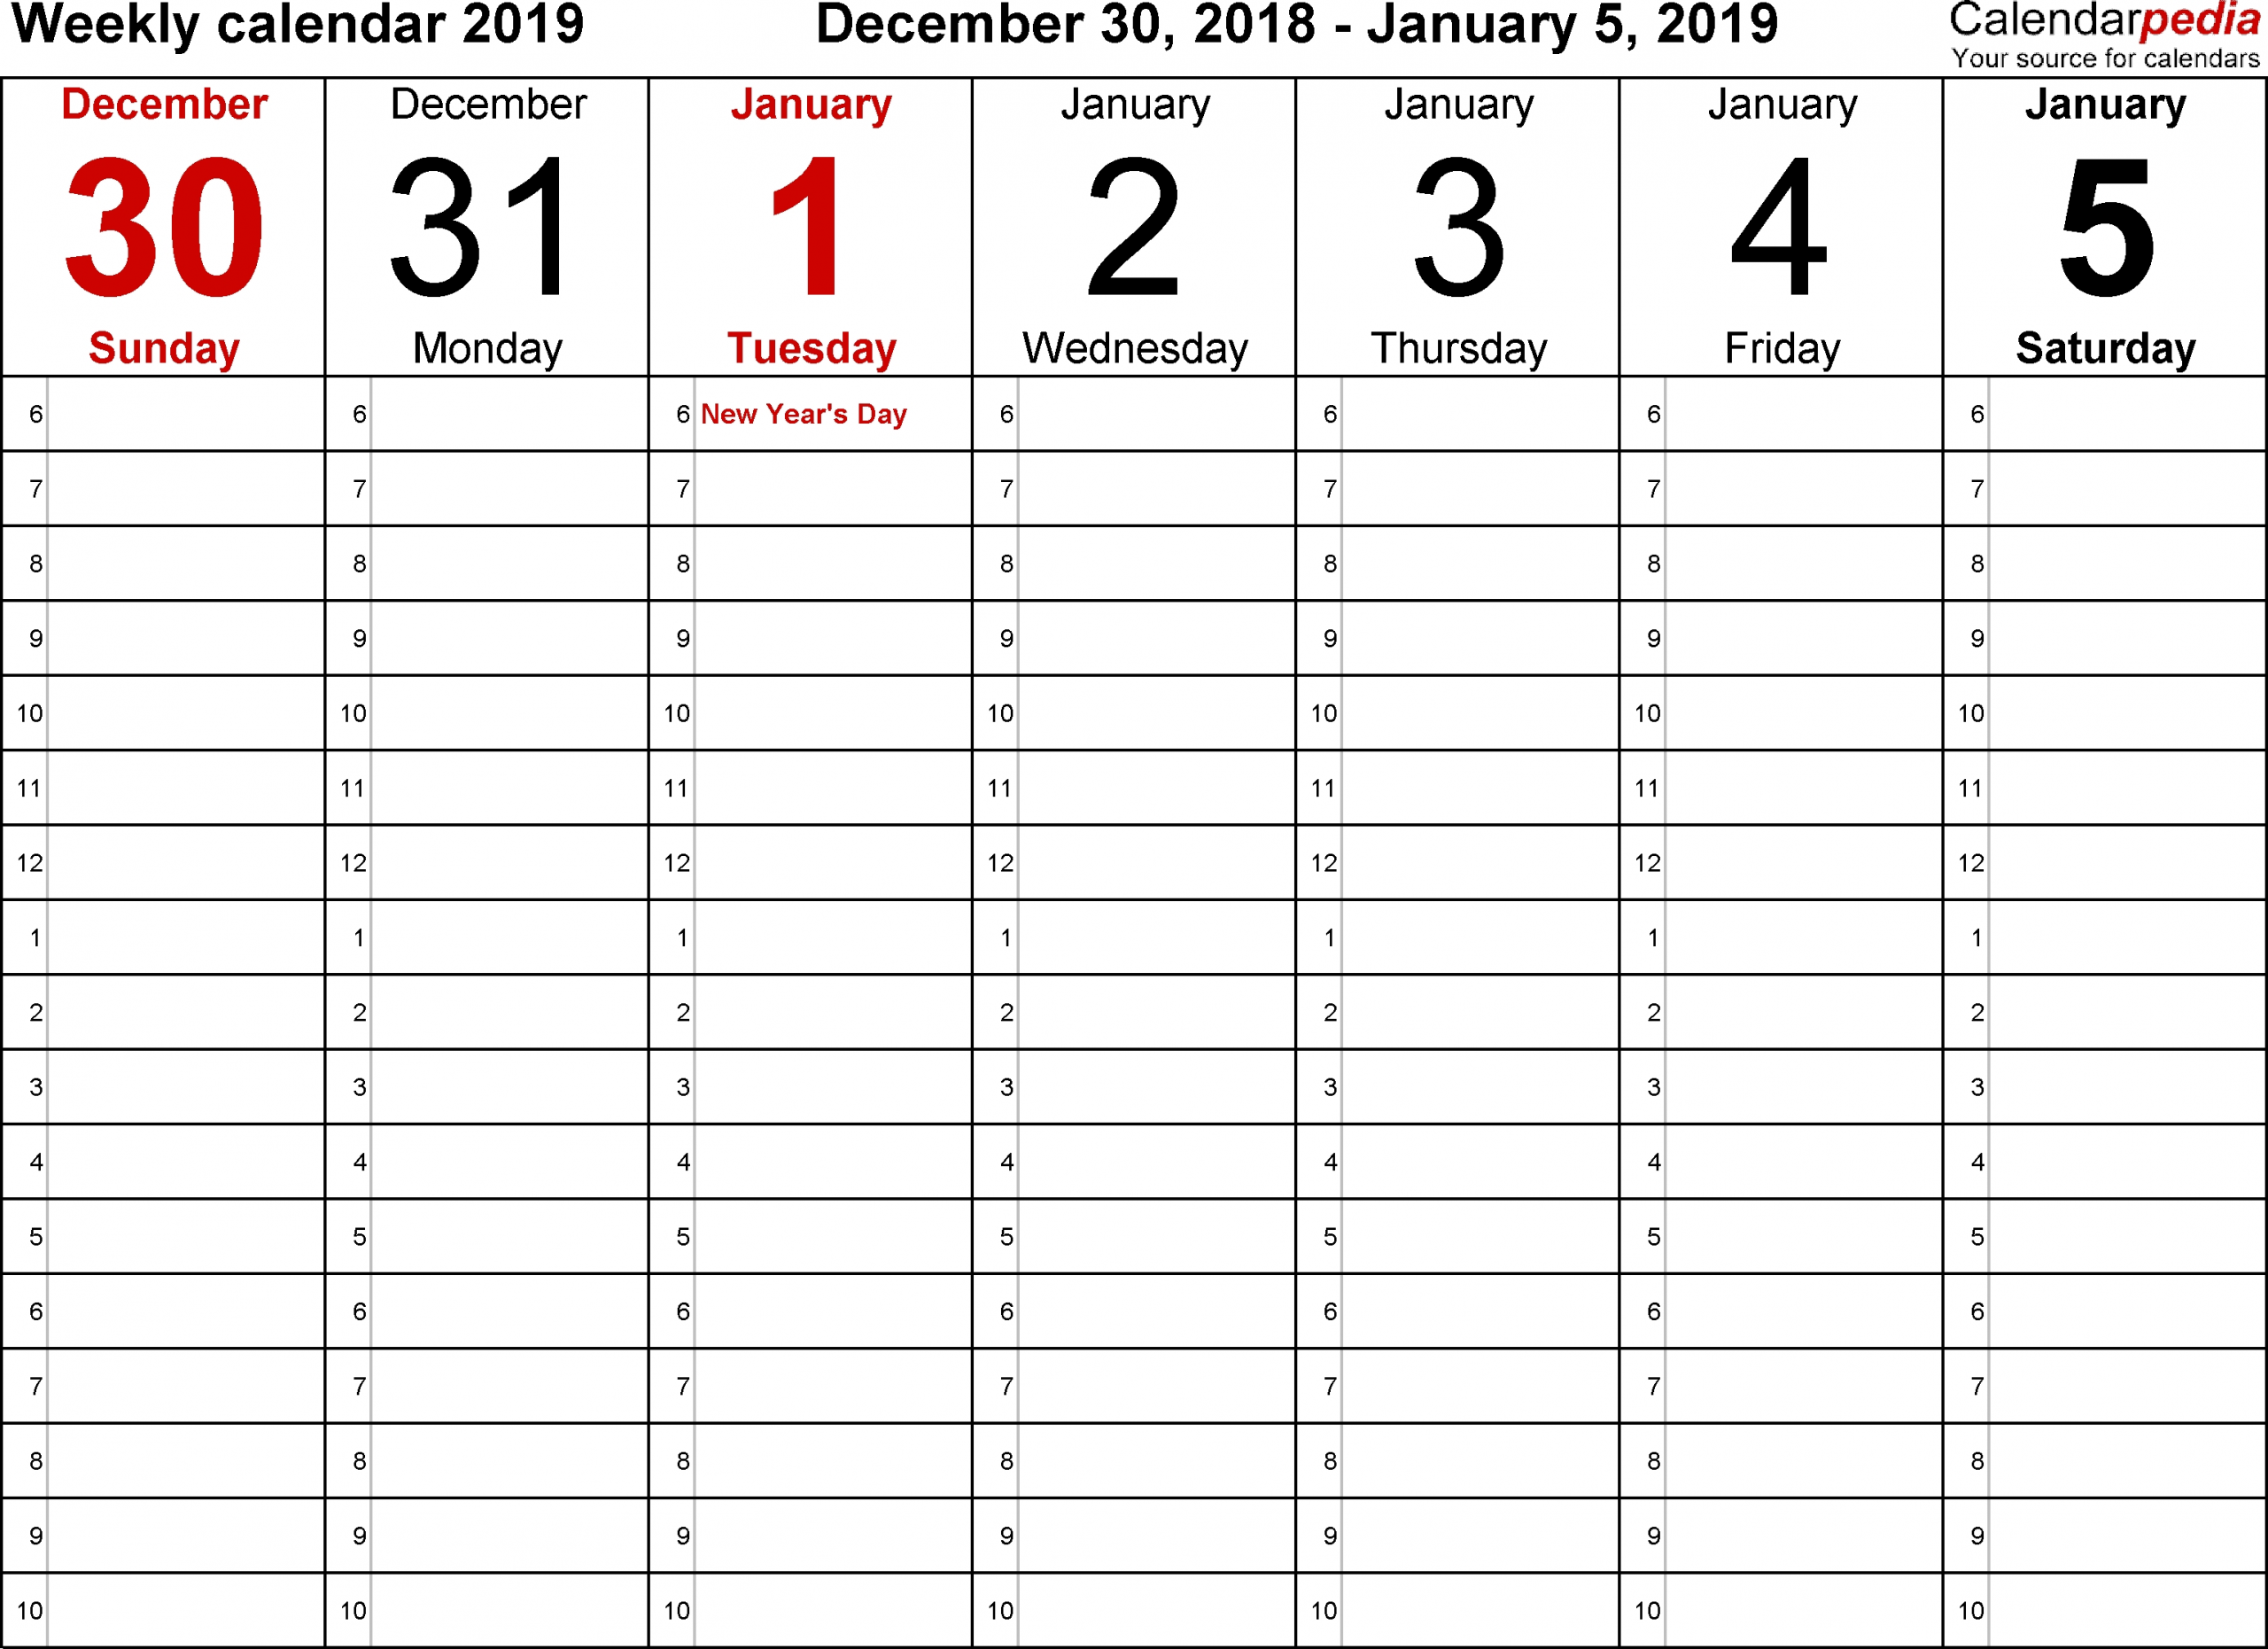 Weekly Calendar For Pdf Free Printable Templates Days Of The Week within Calendar Weeks Printable No Datwes